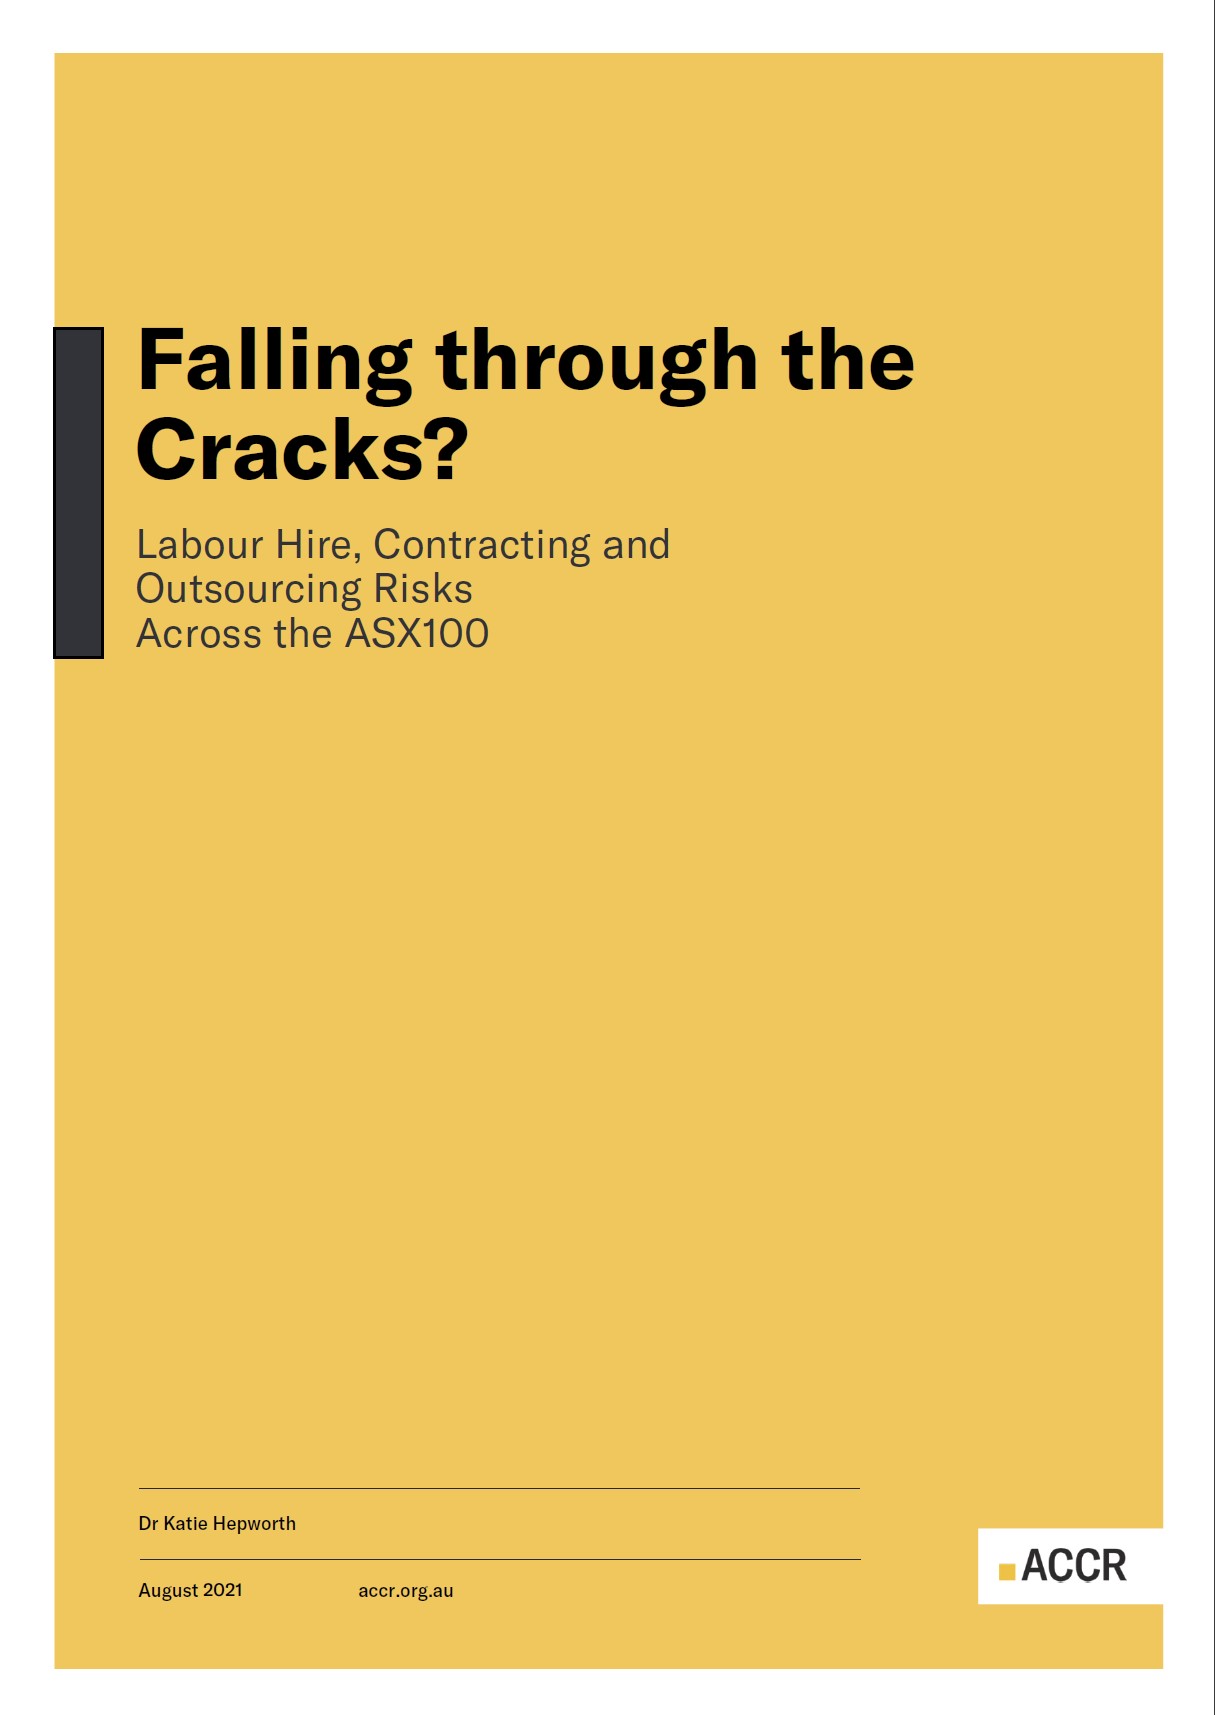 Cover page of the Methodology publication.